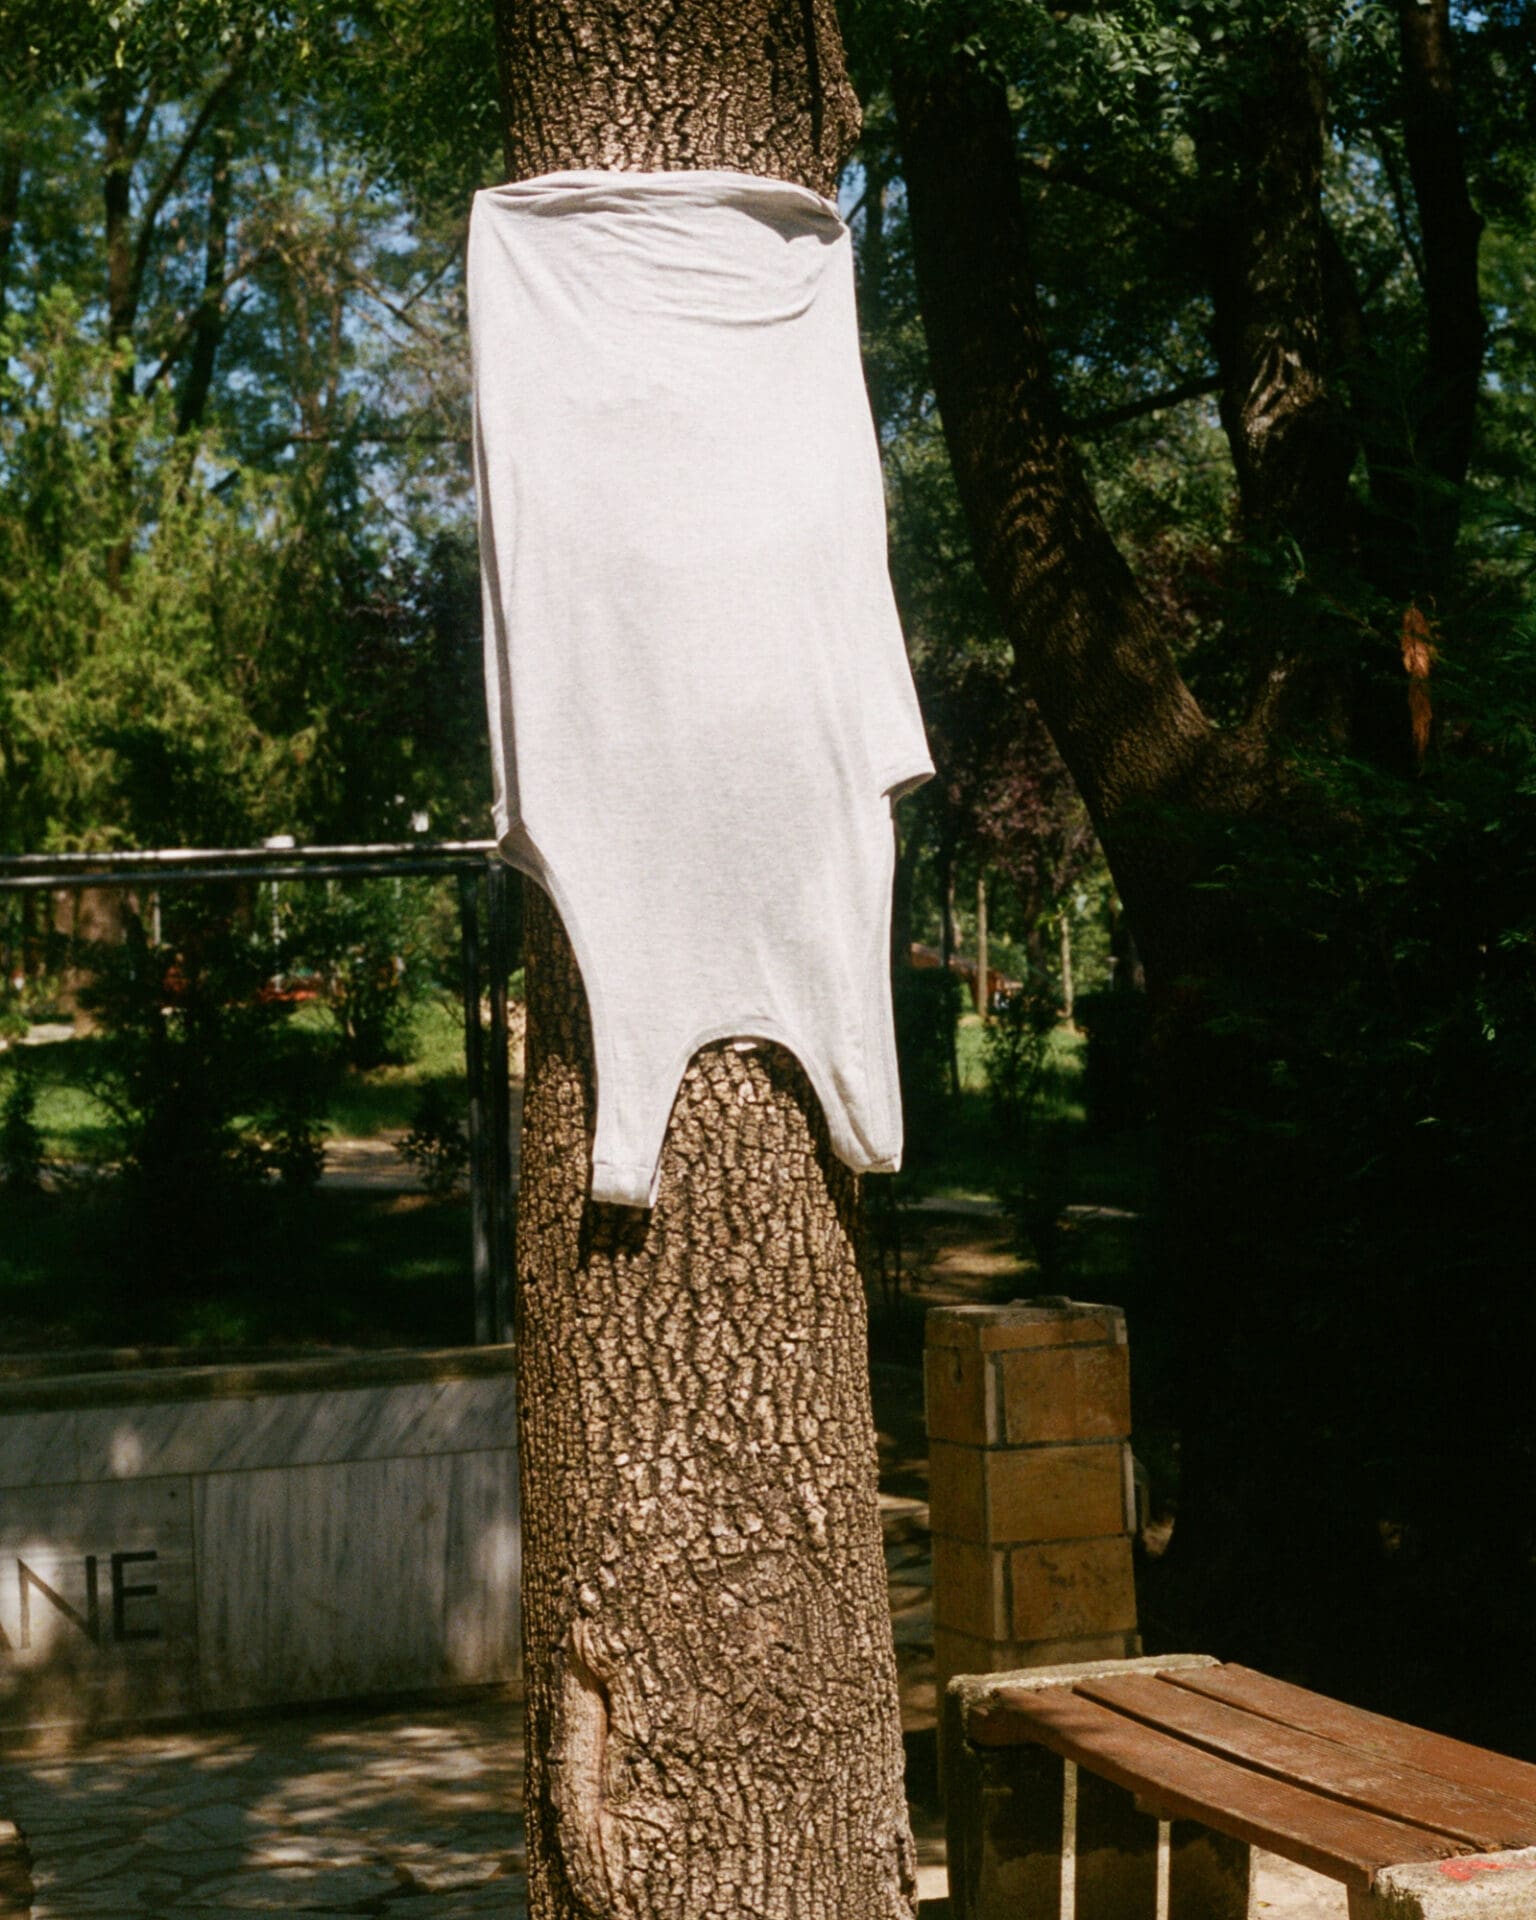 Hazel Gaskin photographs Albania | a white wifebeater hanging upside down to dry against a tree